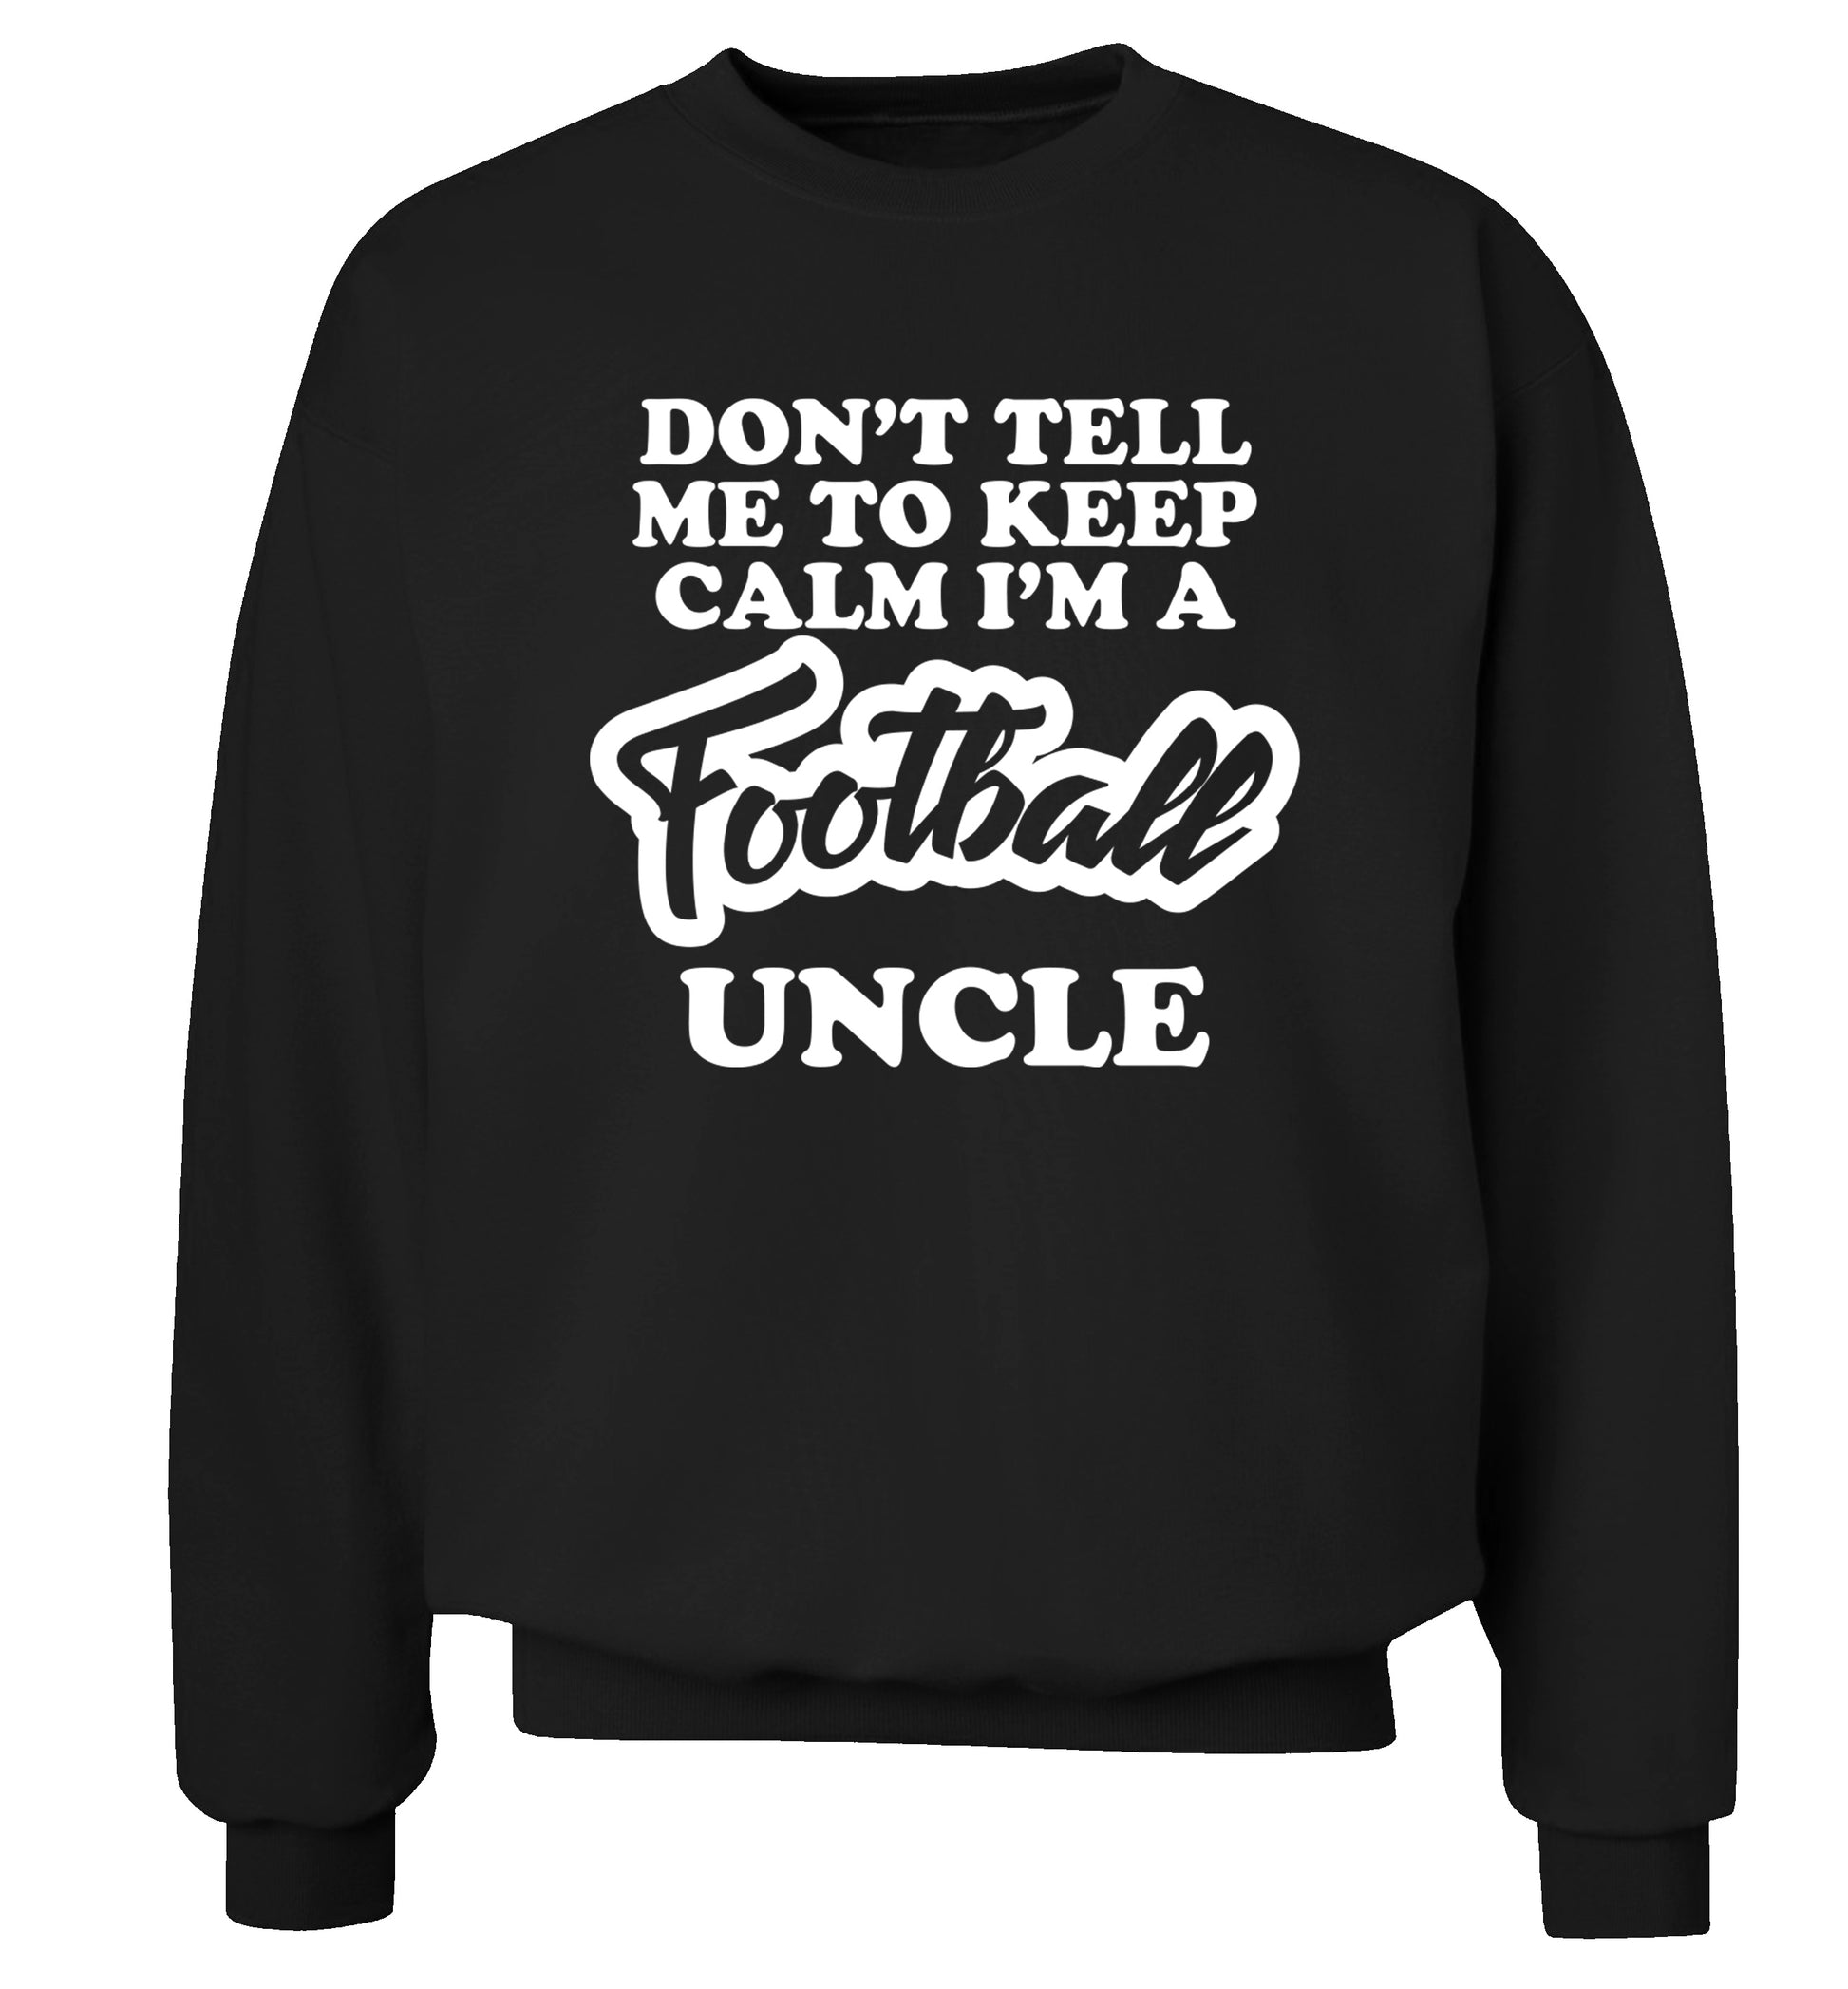 Don't tell me to keep calm I'm a football uncle Adult's unisexblack Sweater 2XL